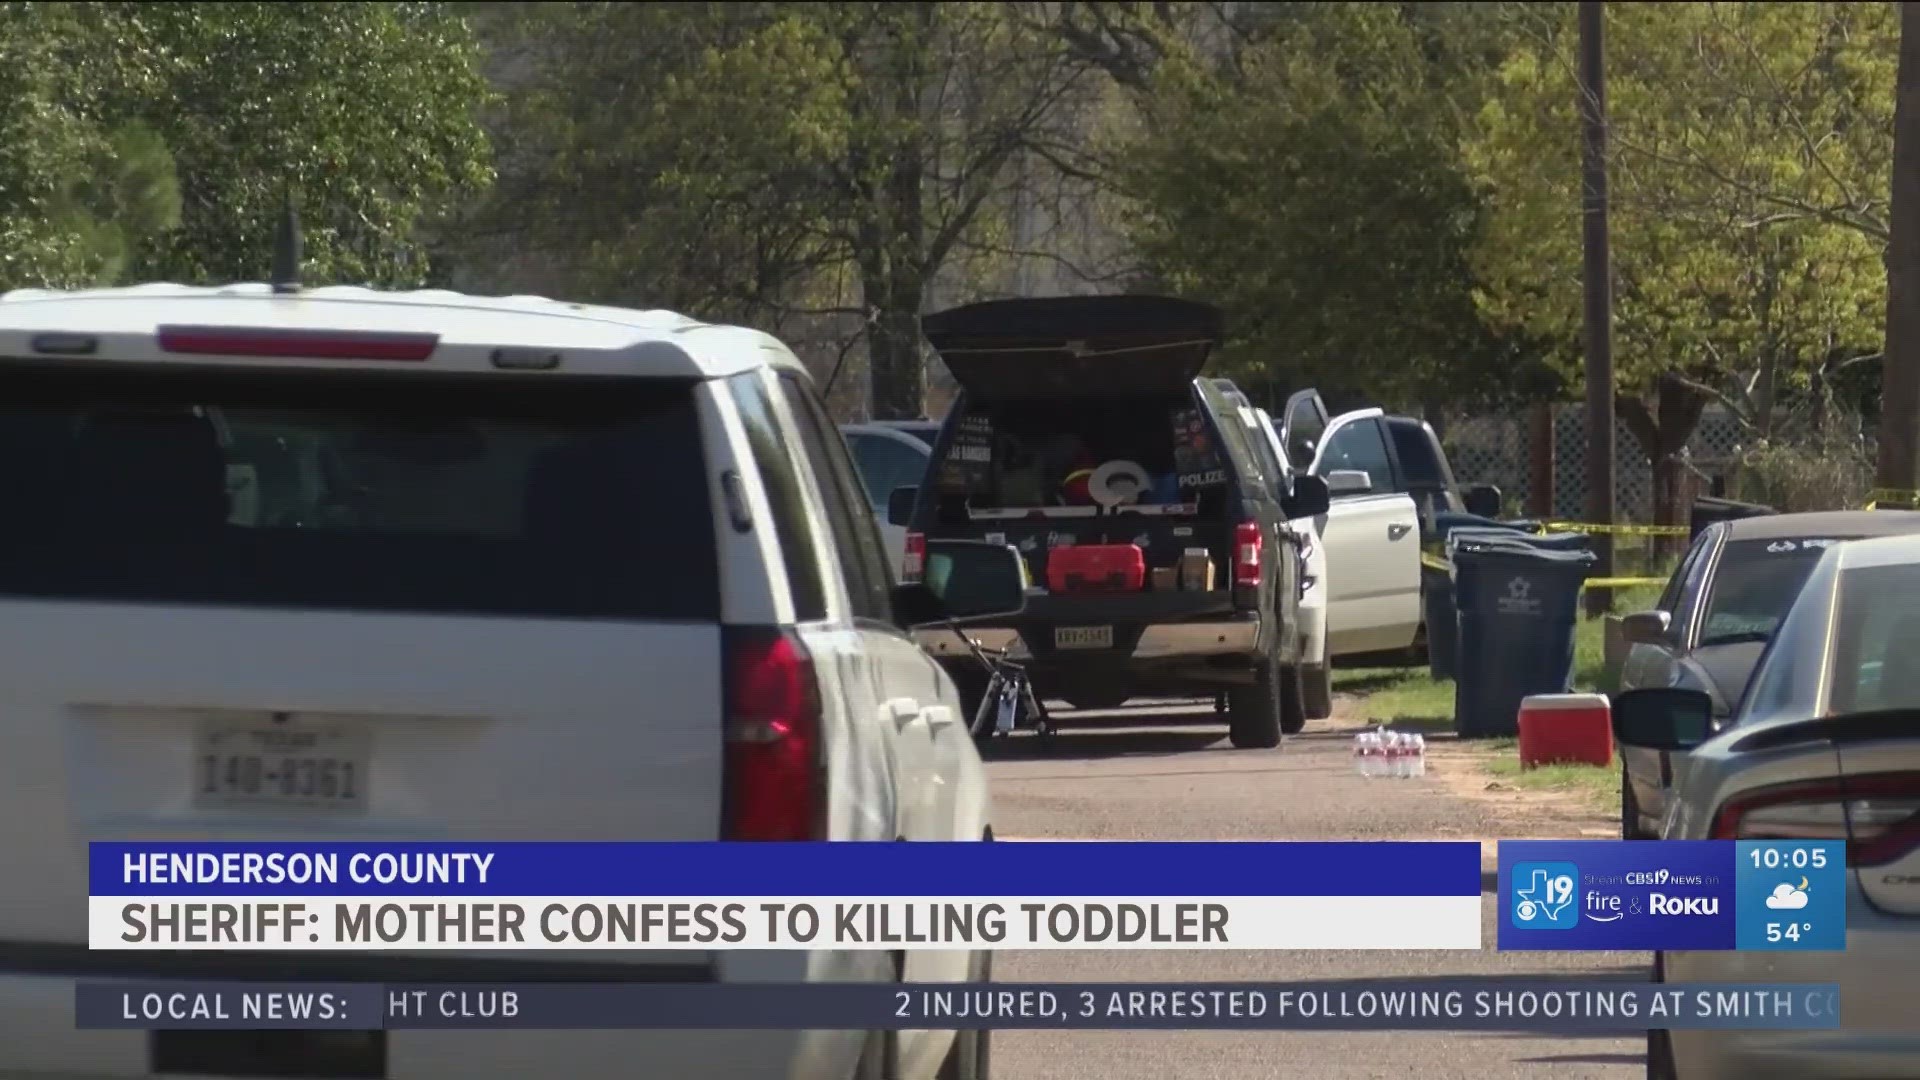 Officials say the initial investigation indicates the child was killed with an "edged weapon."